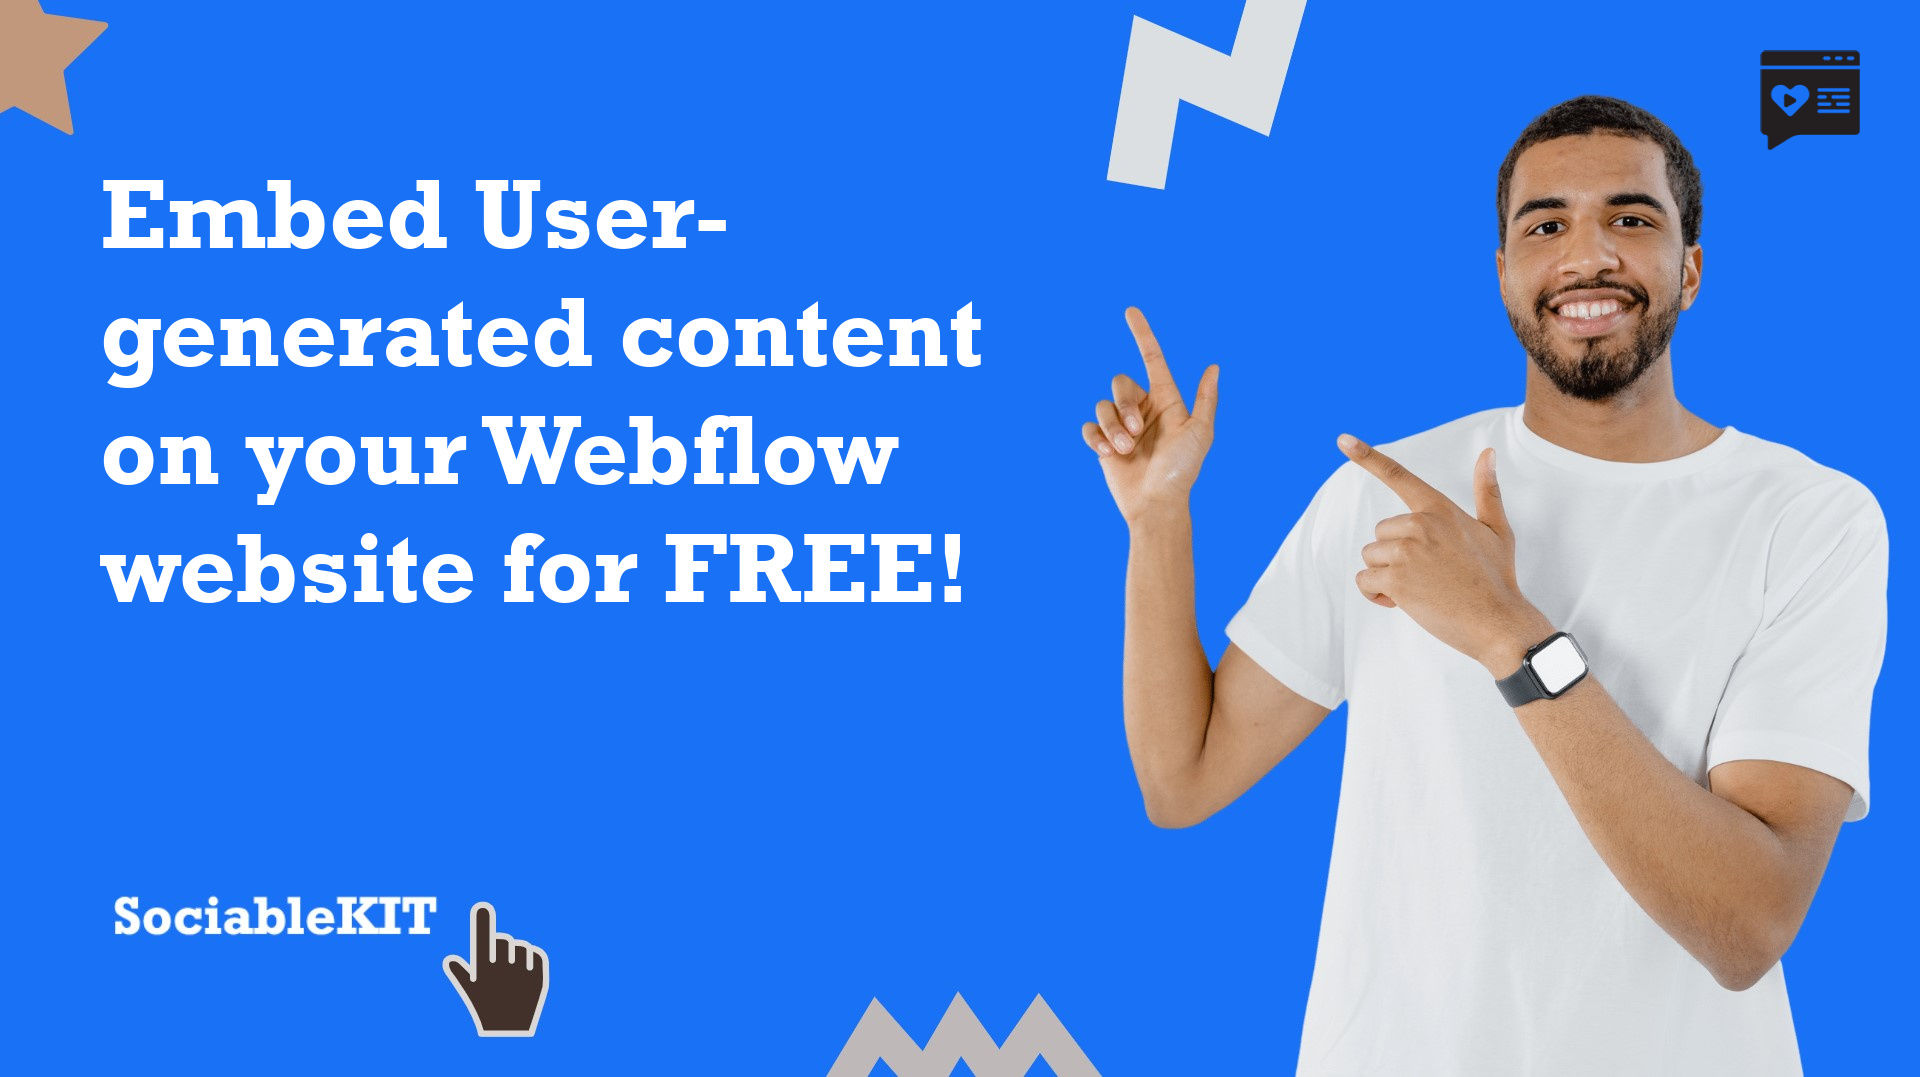 How to embed User-generated content on your Webflow website for FREE?